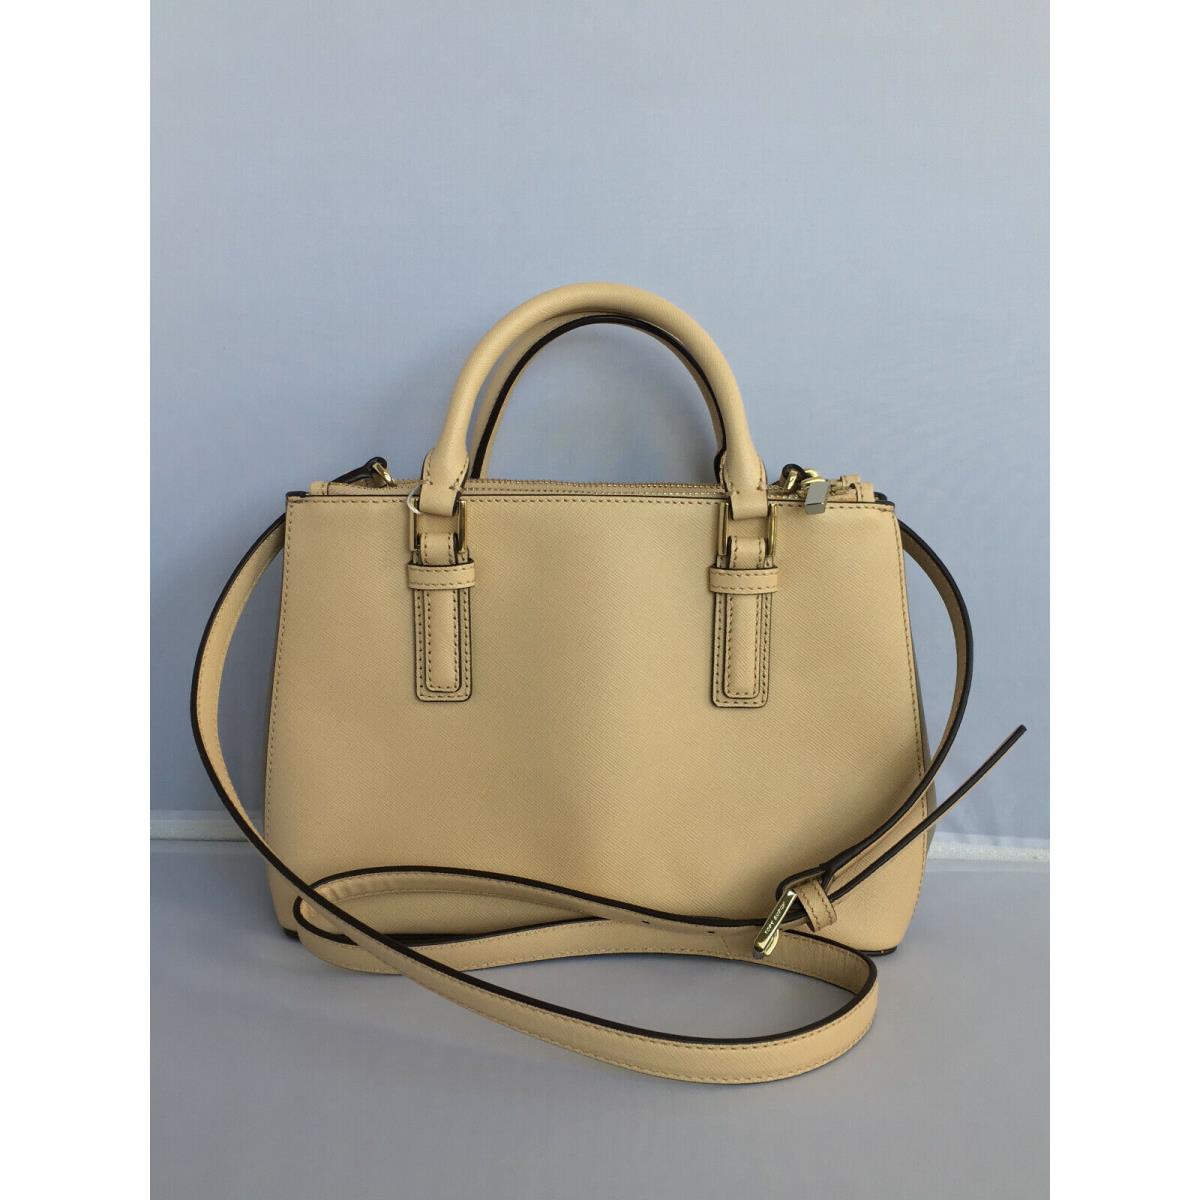 Tory Burch Robinson Color-block Micro Double-zip Tote -toasted Wheat/french  Gray - Tory Burch bag - 888736499639 | Fash Brands